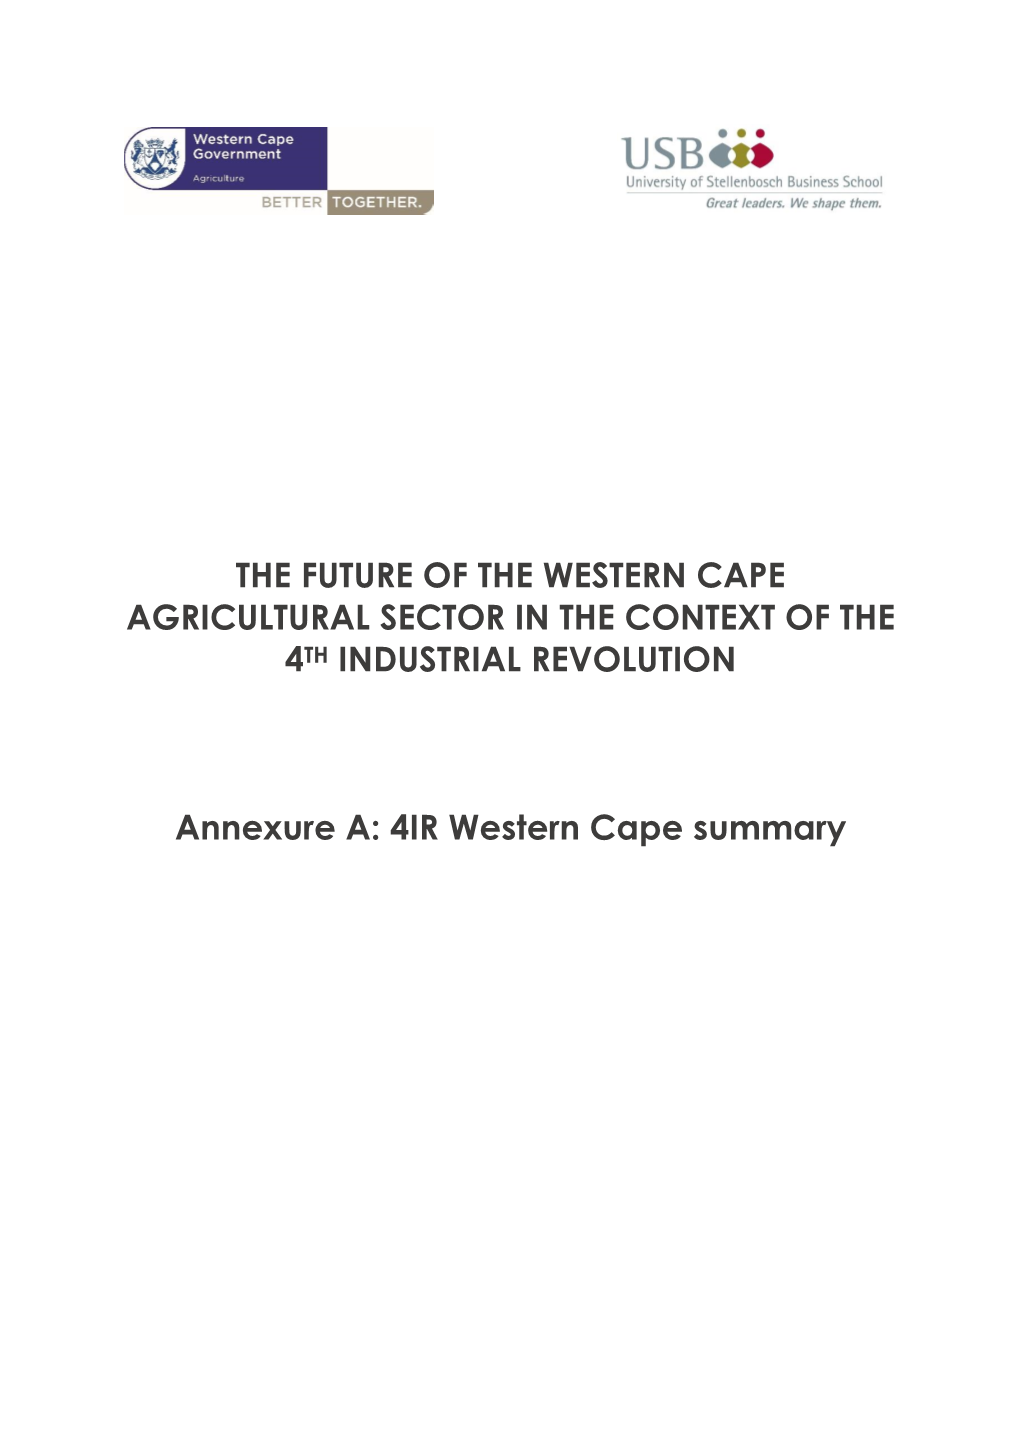 The Future of the Western Cape Agricultural Sector in the Context of the 4Th Industrial Revolution